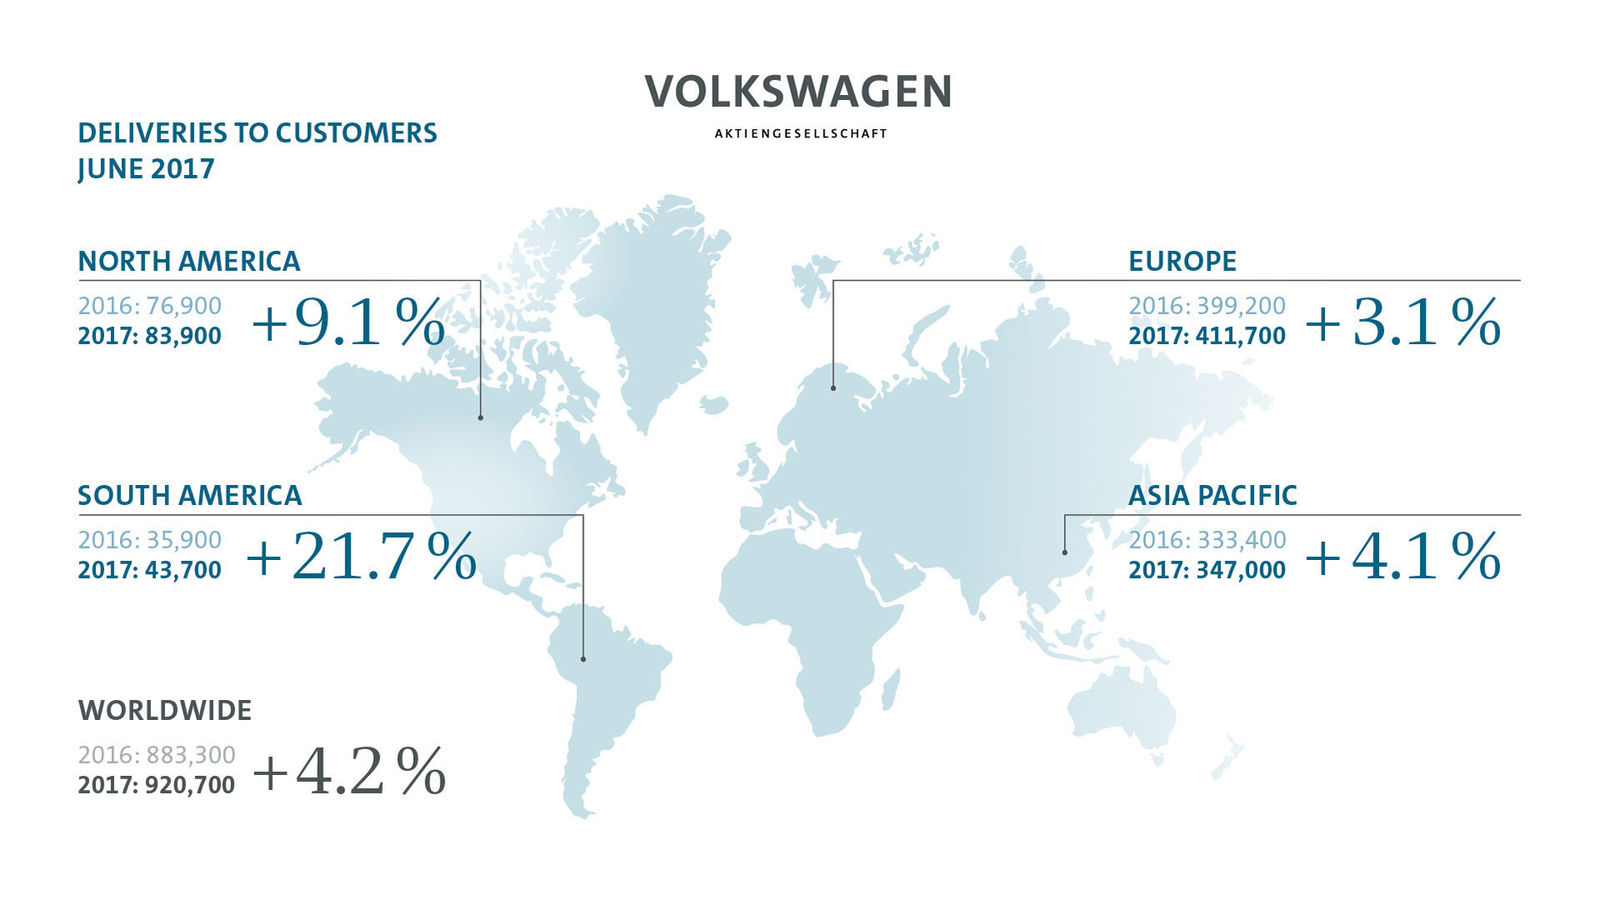 Volkswagen Group delivers 5.2 million vehicles in first half of year